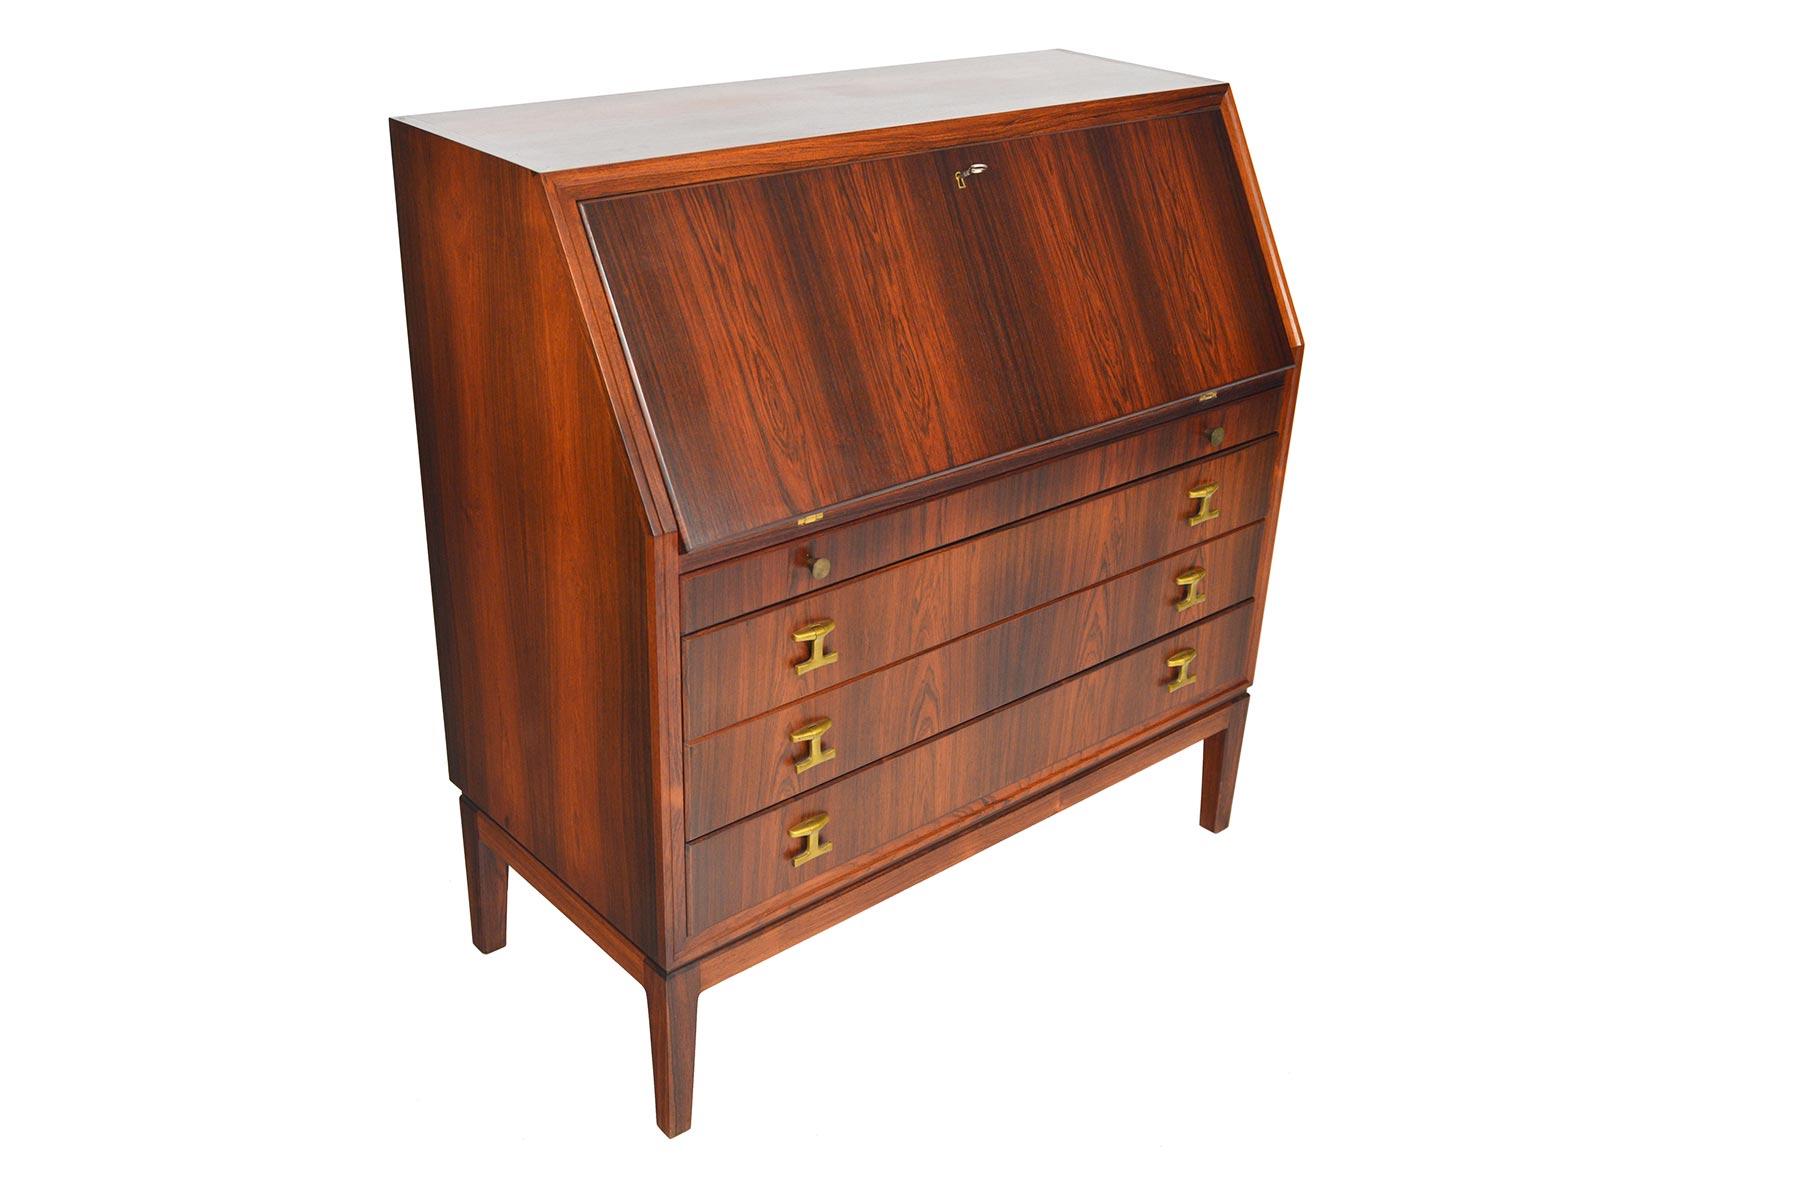 This beautifully appointed Danish modern rosewood secretary desk features rich grain and spectacular original brass hardware. Cased with a mitered joinery and beveled edge, a large desk surface is revealed when the door is lowered. The interior